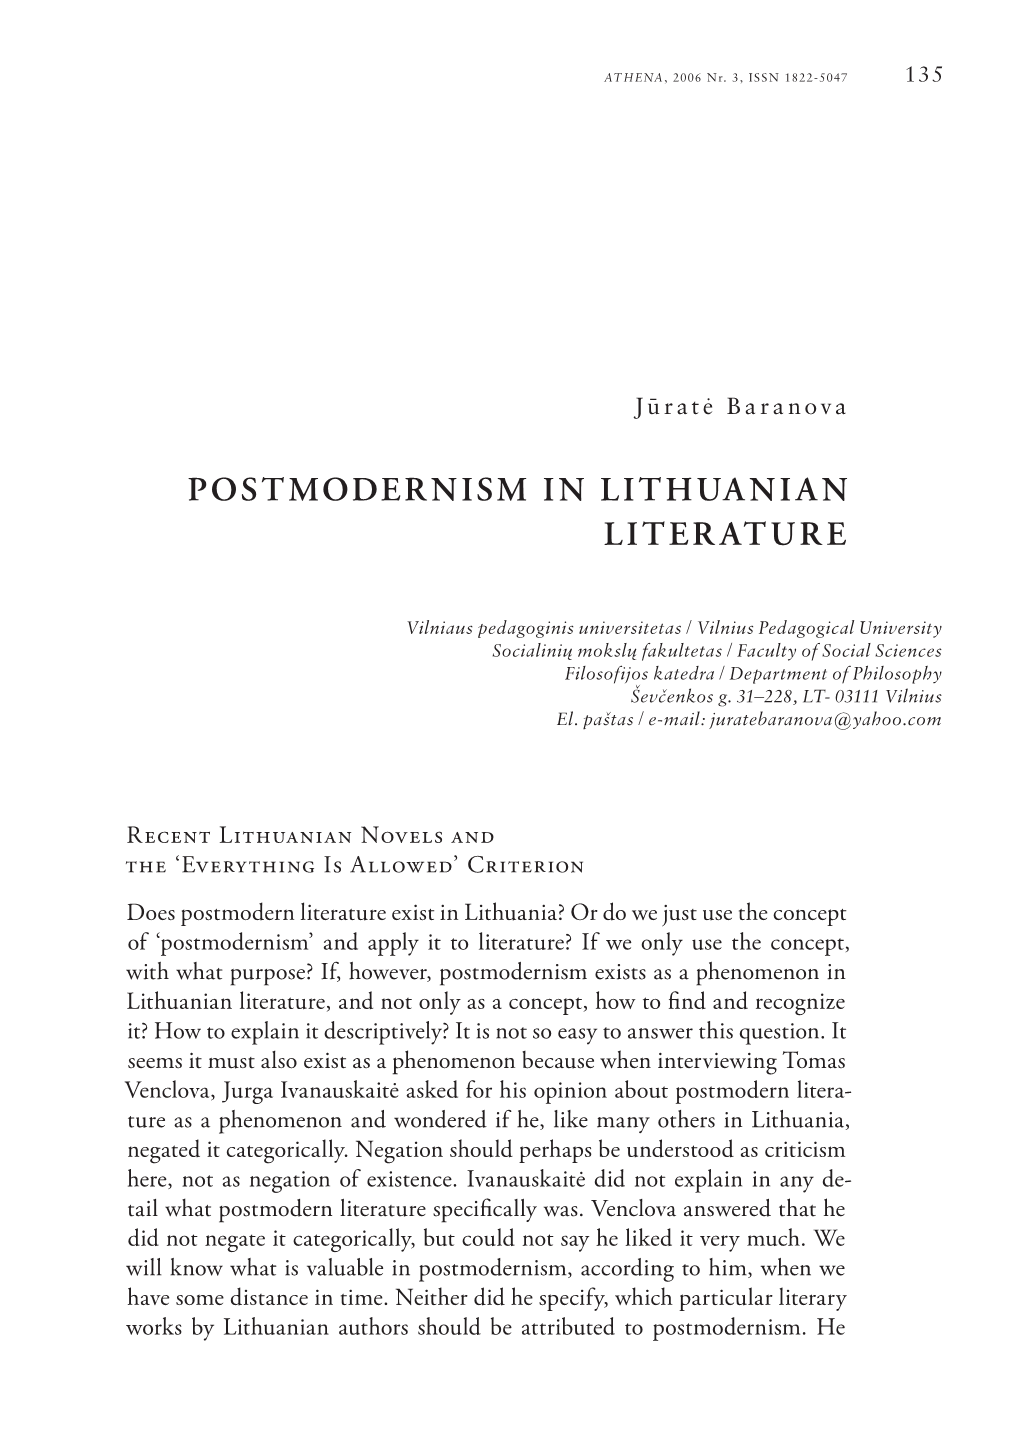 Postmodernism in Lithuanian Literature